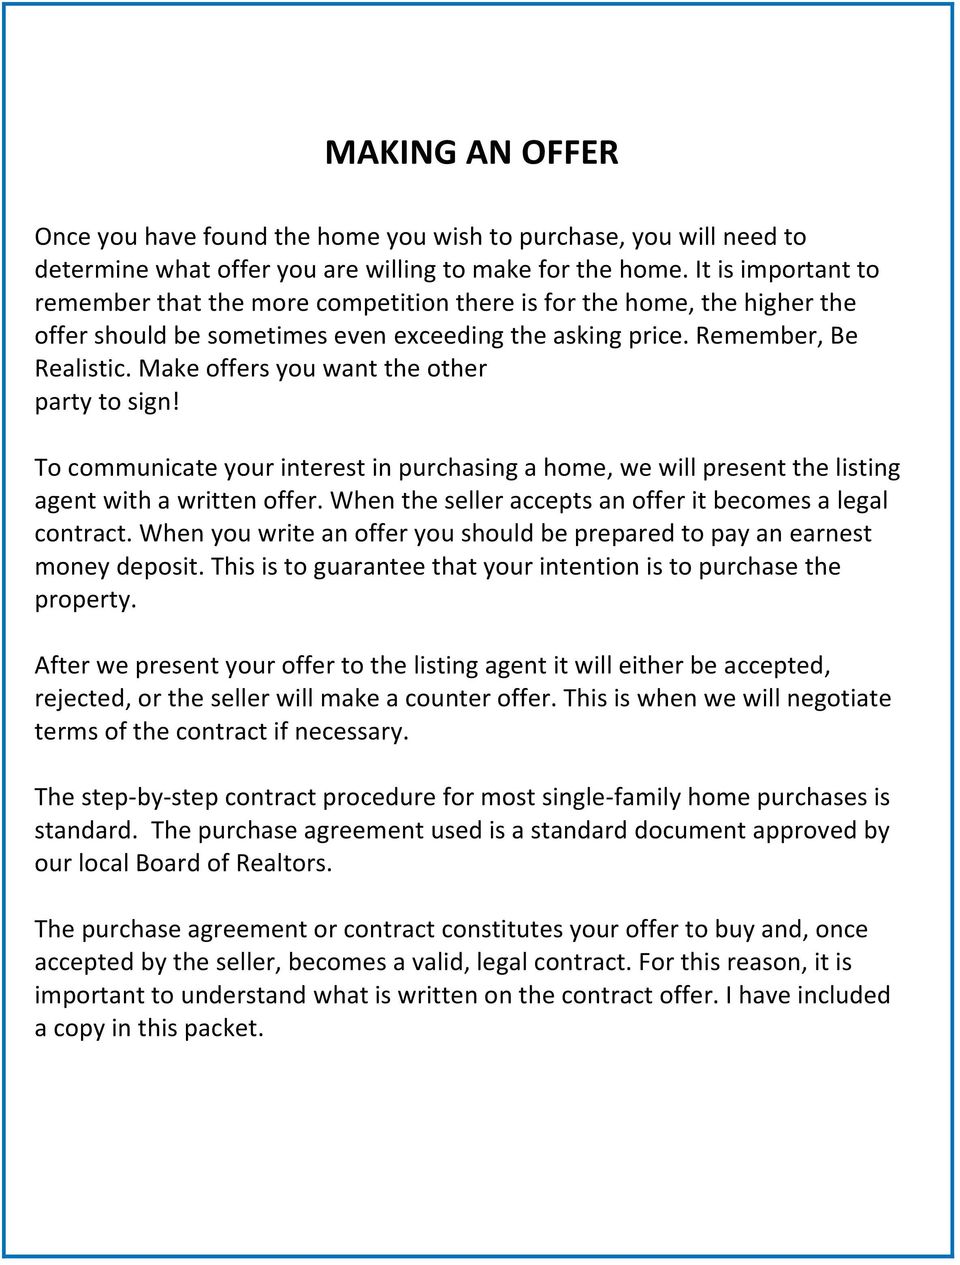 Make offers you want the other party to sign! To communicate your interest in purchasing a home, we will present the listing agent with a written offer.